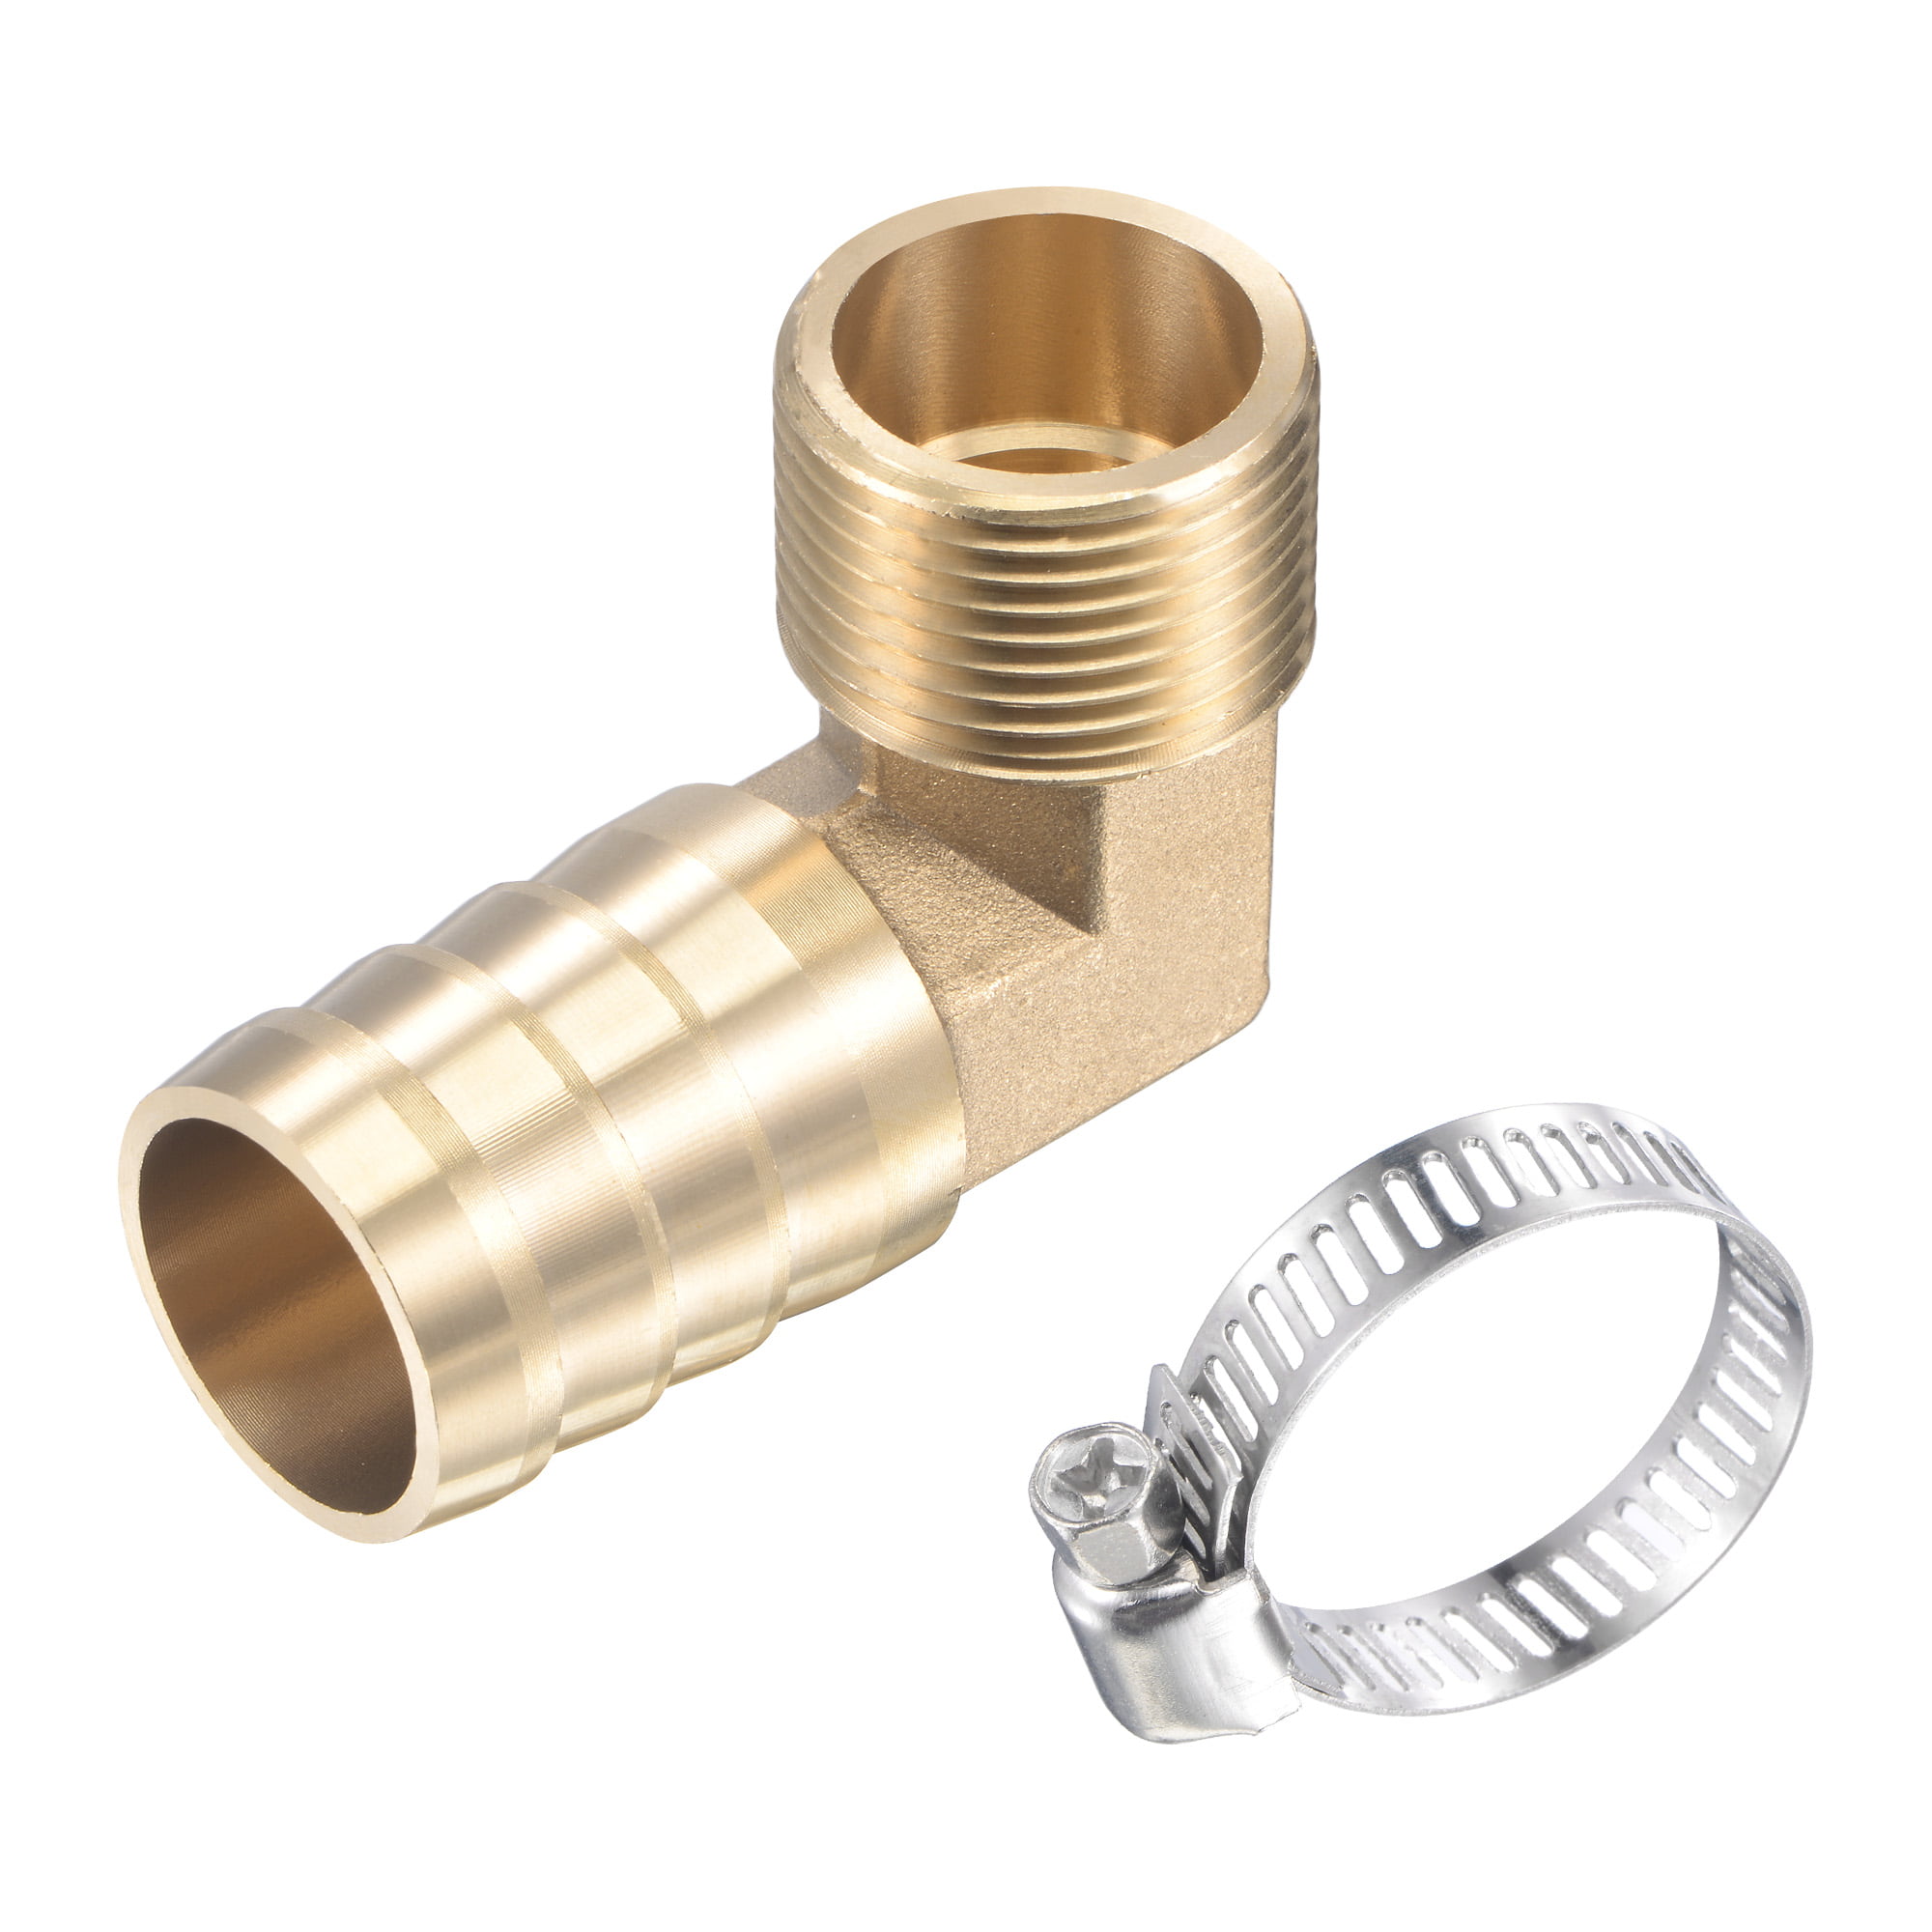 25mm Hose Barb x 3/4 Male BSP Thread Brass Barbed Pipe Fitting Coupler Connector Adapter For Fuel Gas Water 